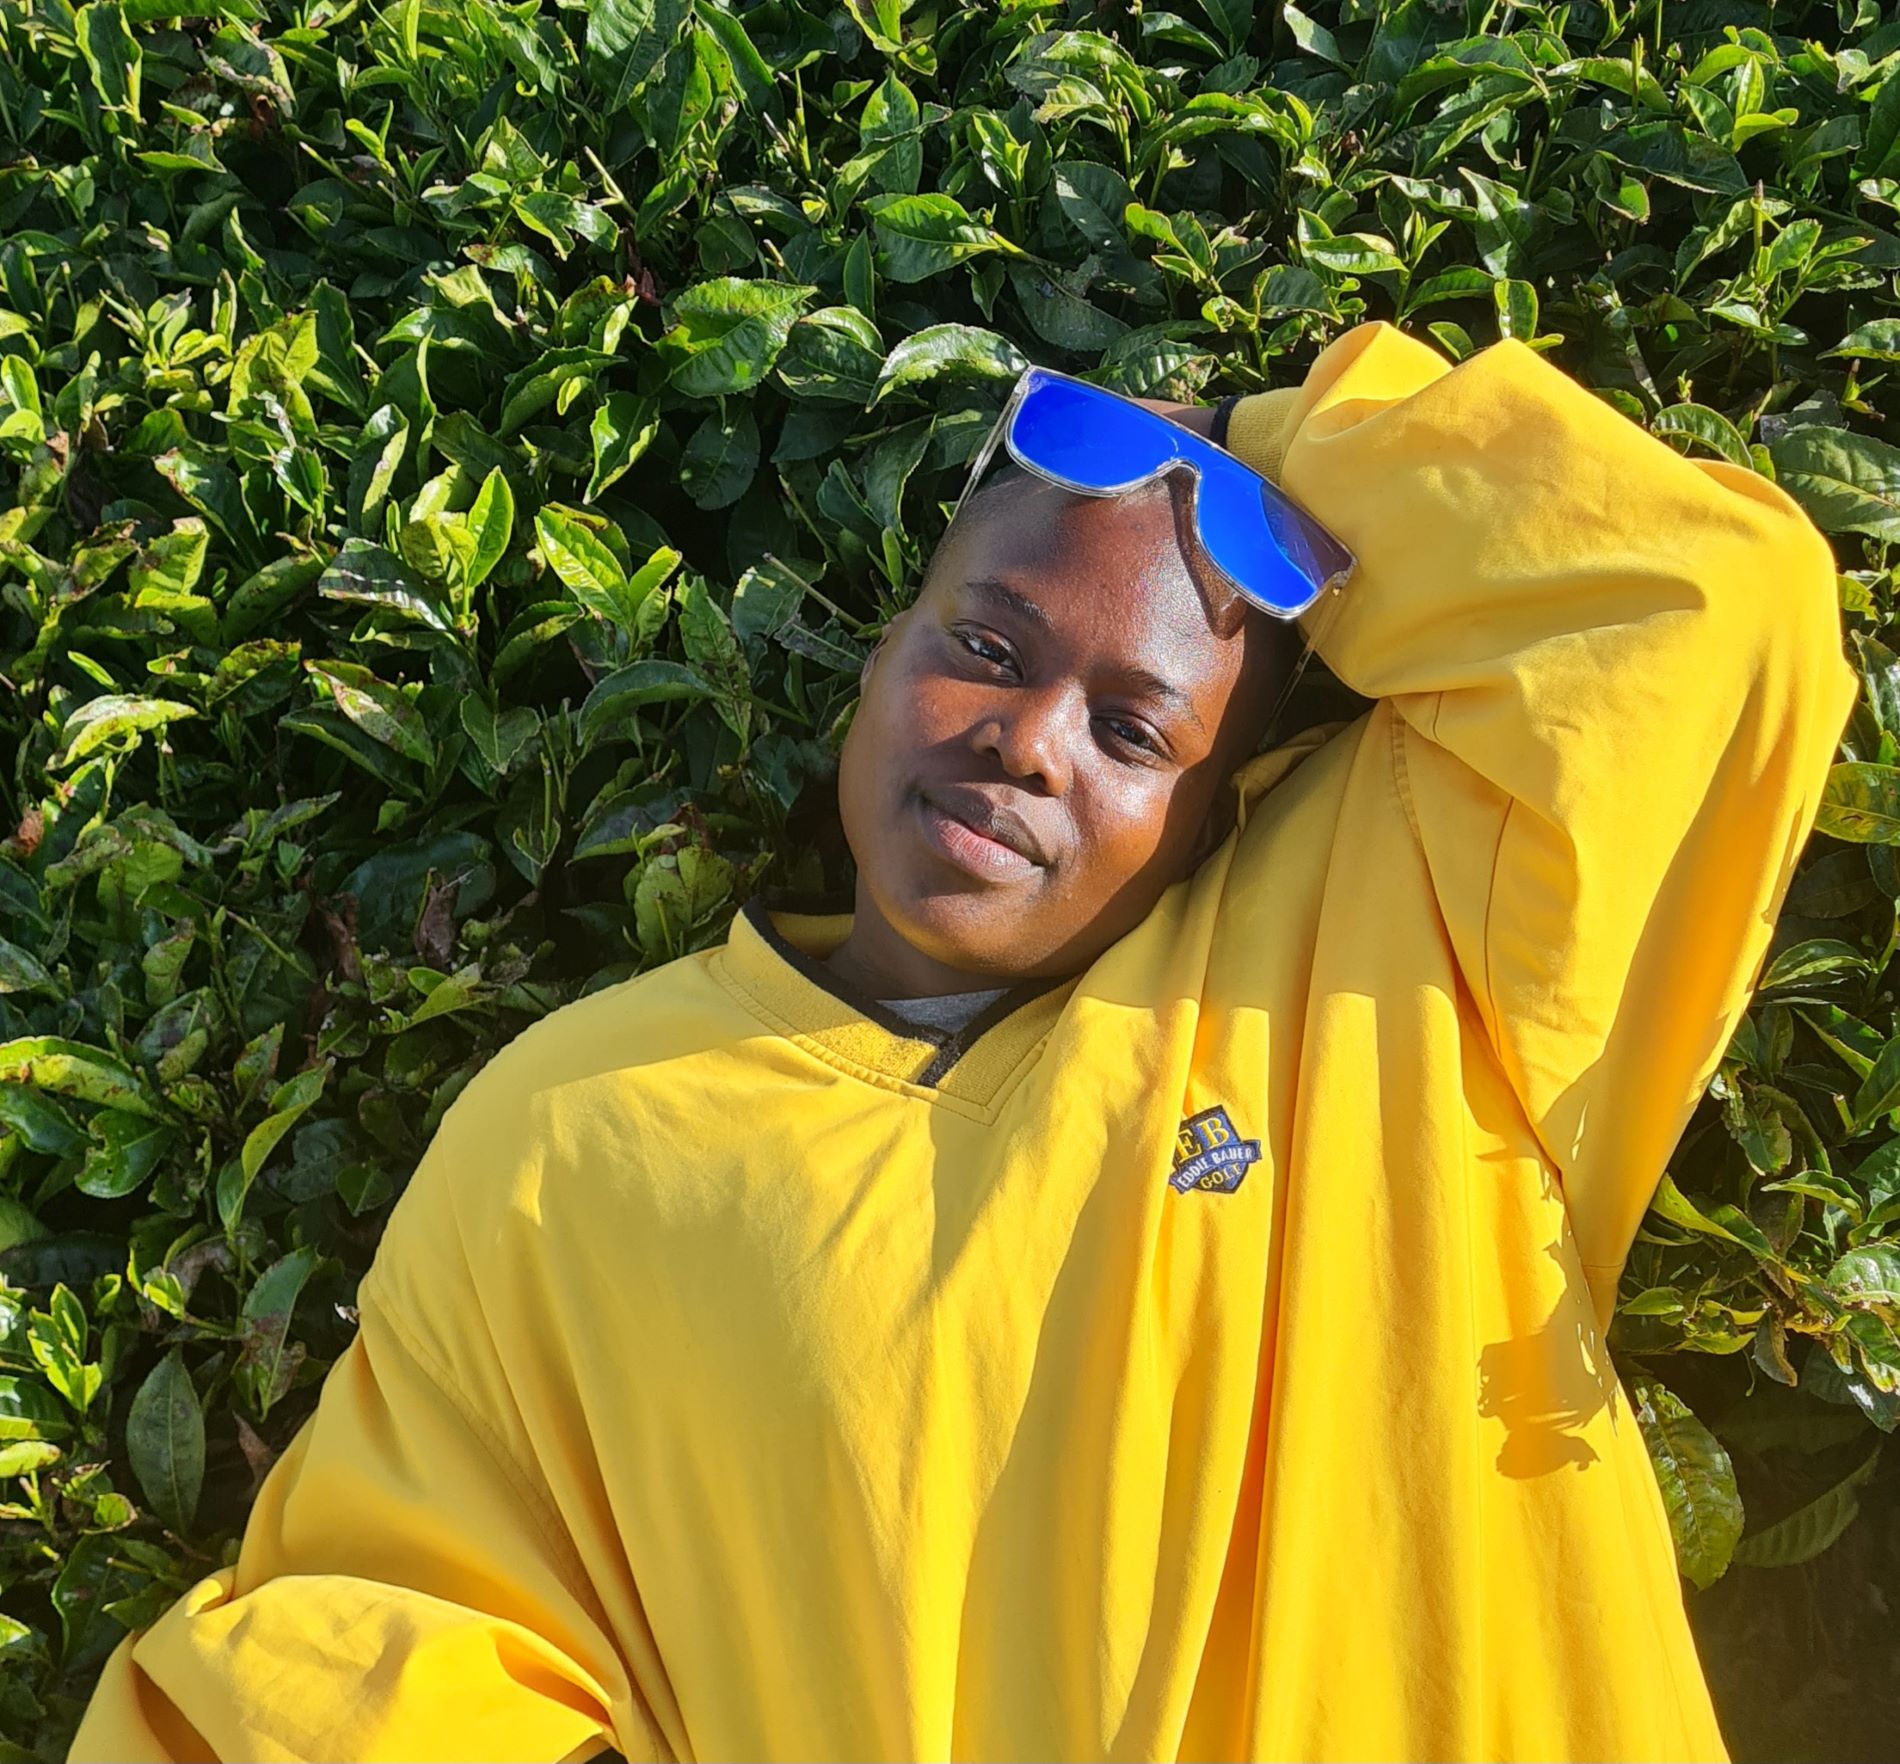 Portrait of artist Karen Wangare Leonard. She is posed in a bright yellow jacket with blue sunglasses in front of green leaves on a bush.